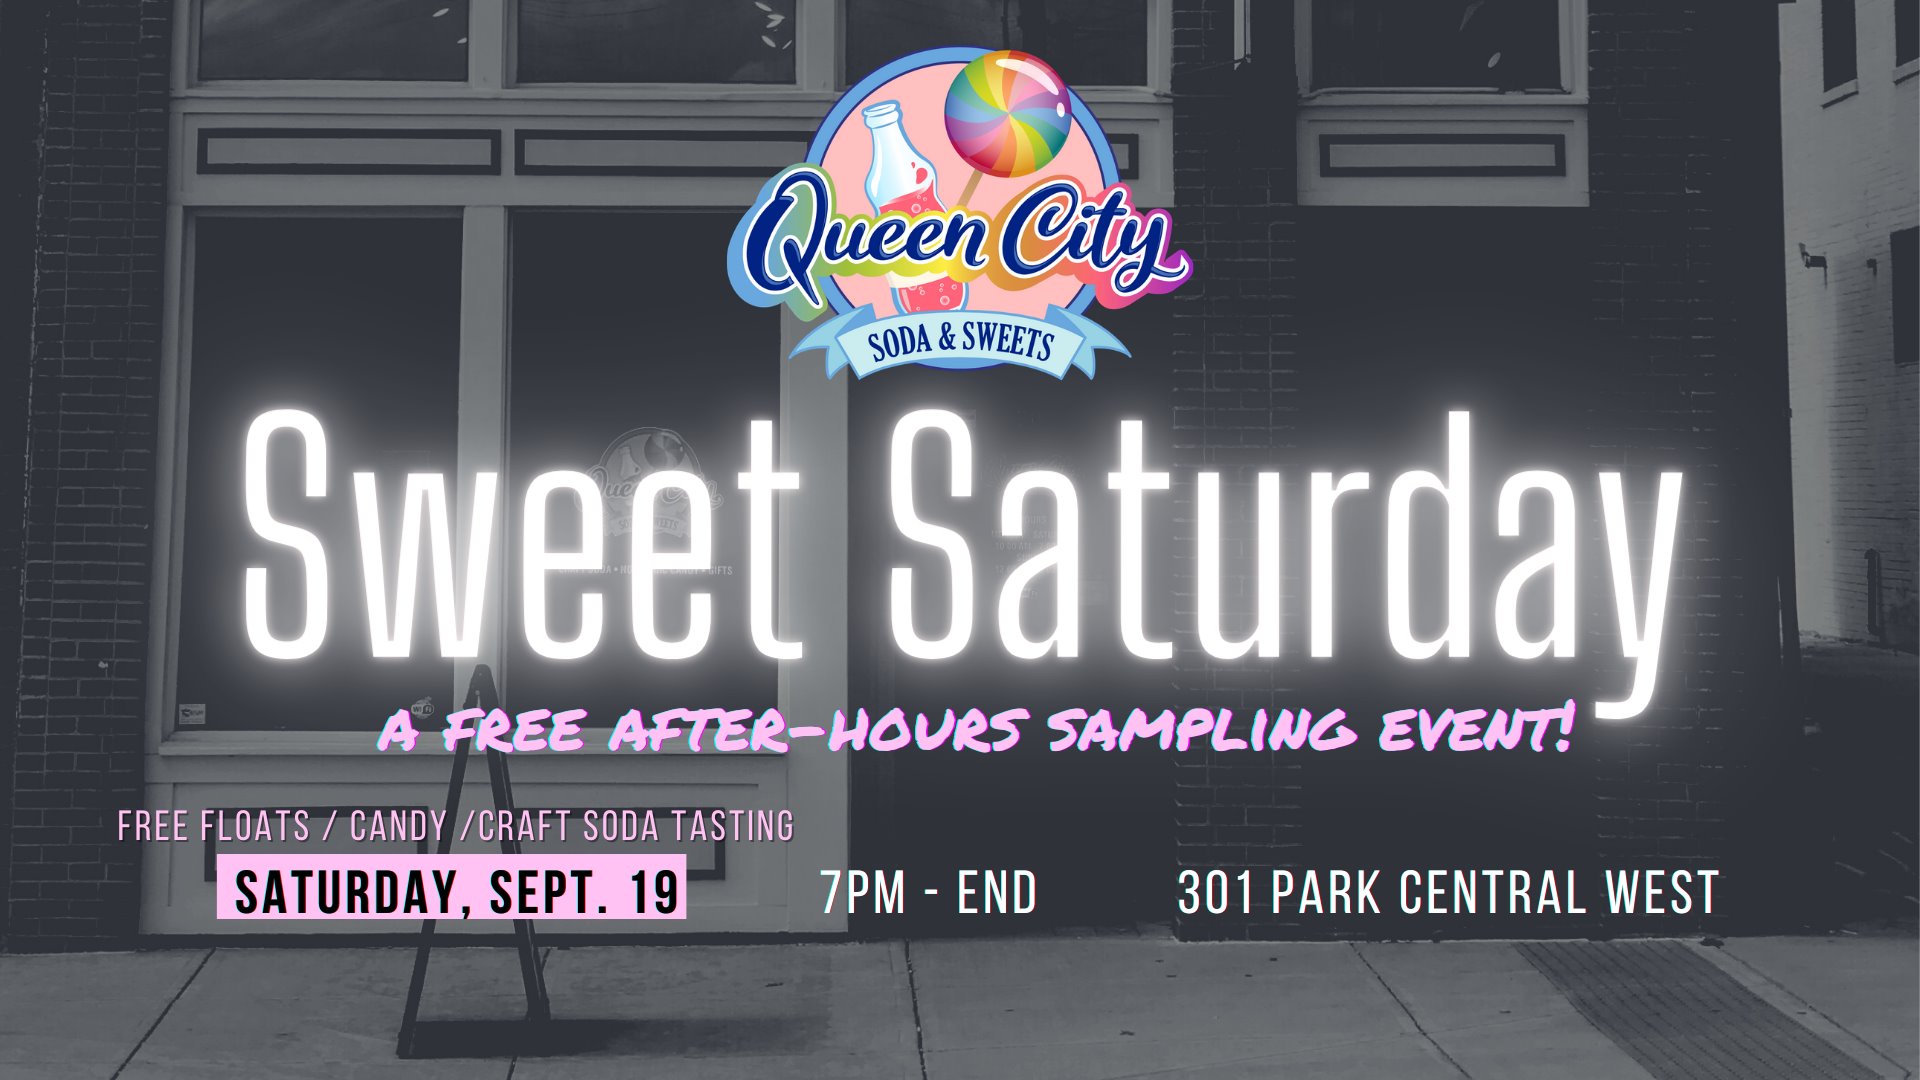 Sweet Saturday: After-Hours FREE Sampling Event — at Queen City Soda & Sweets